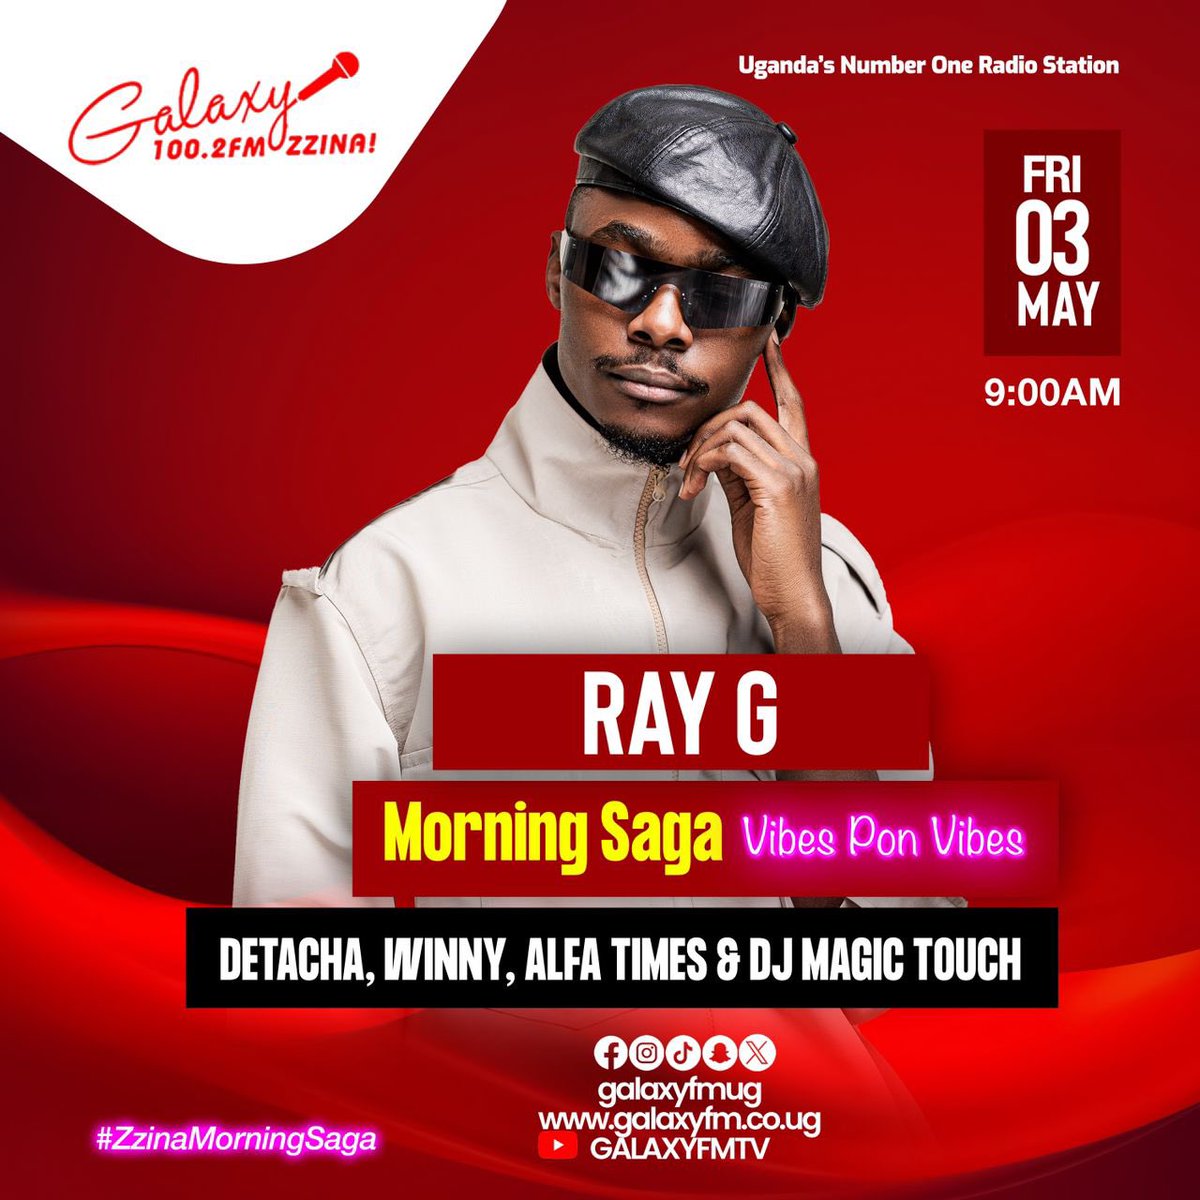 Your favorite Friday switch-up is here! @deejaylx256 on the #ZzinaMorningSaga live on @GalaxyFMUg 6am - 10am! Let’s get this day started Guest: @Ray_G_official Listen here: galaxyfm.co.ug/radio This is not just a show, It’s an experience Man A Star